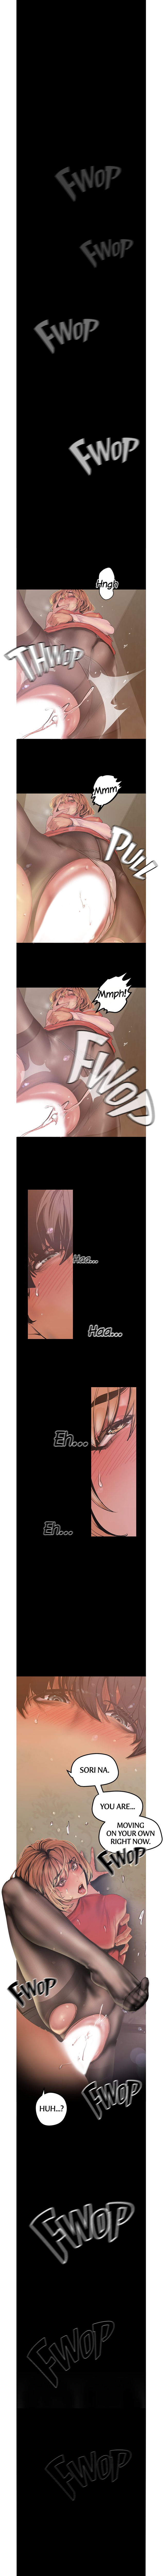 Panel Image 1 for chapter 121 of manhwa A Wonderful New World on read.oppai.stream